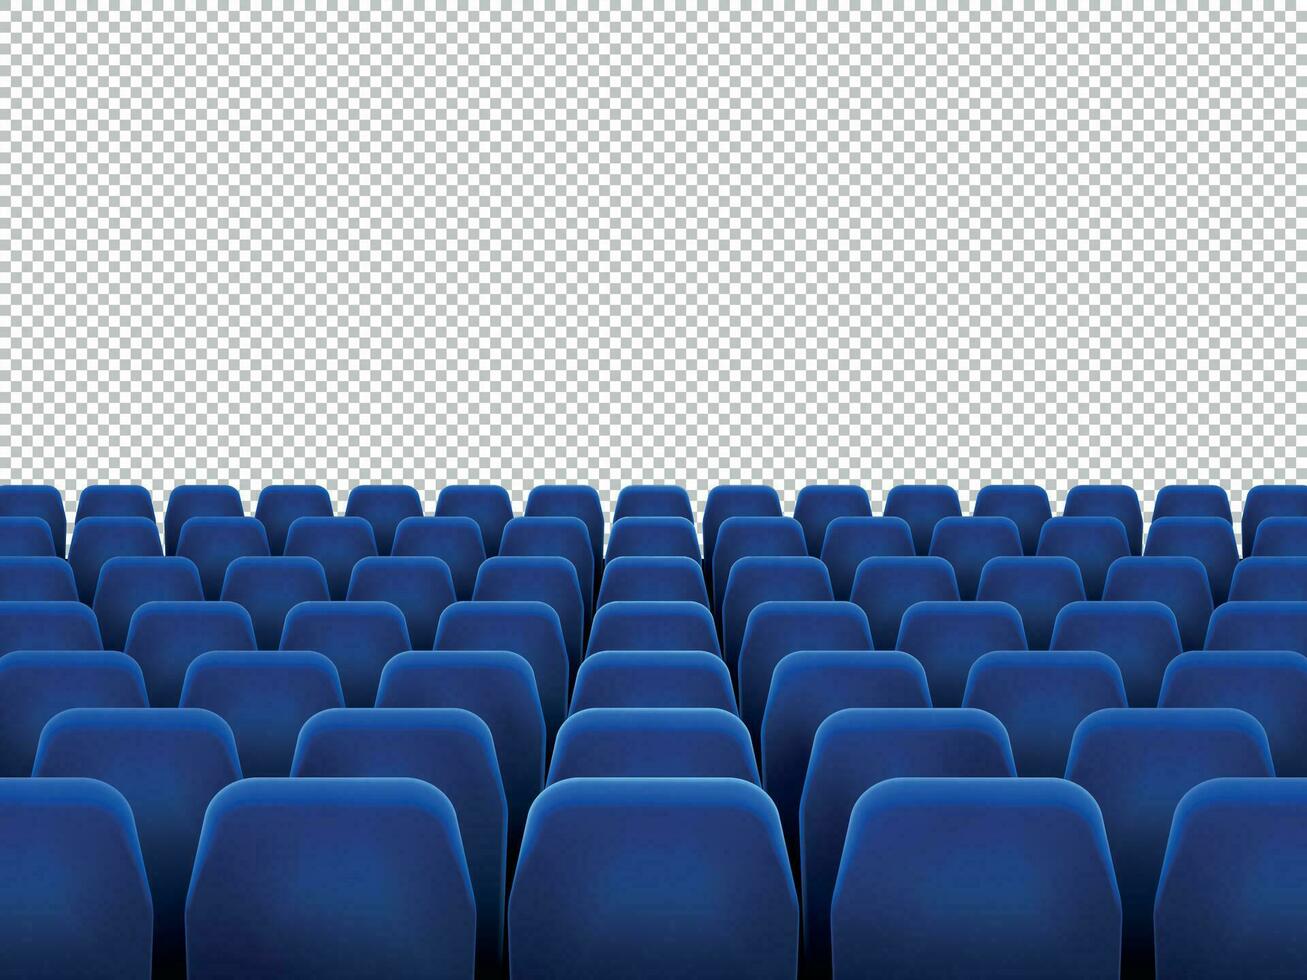 Isolated blue armchairs for cinema, theatre or opera. Realistic row with chairs for watching movie, seats vector